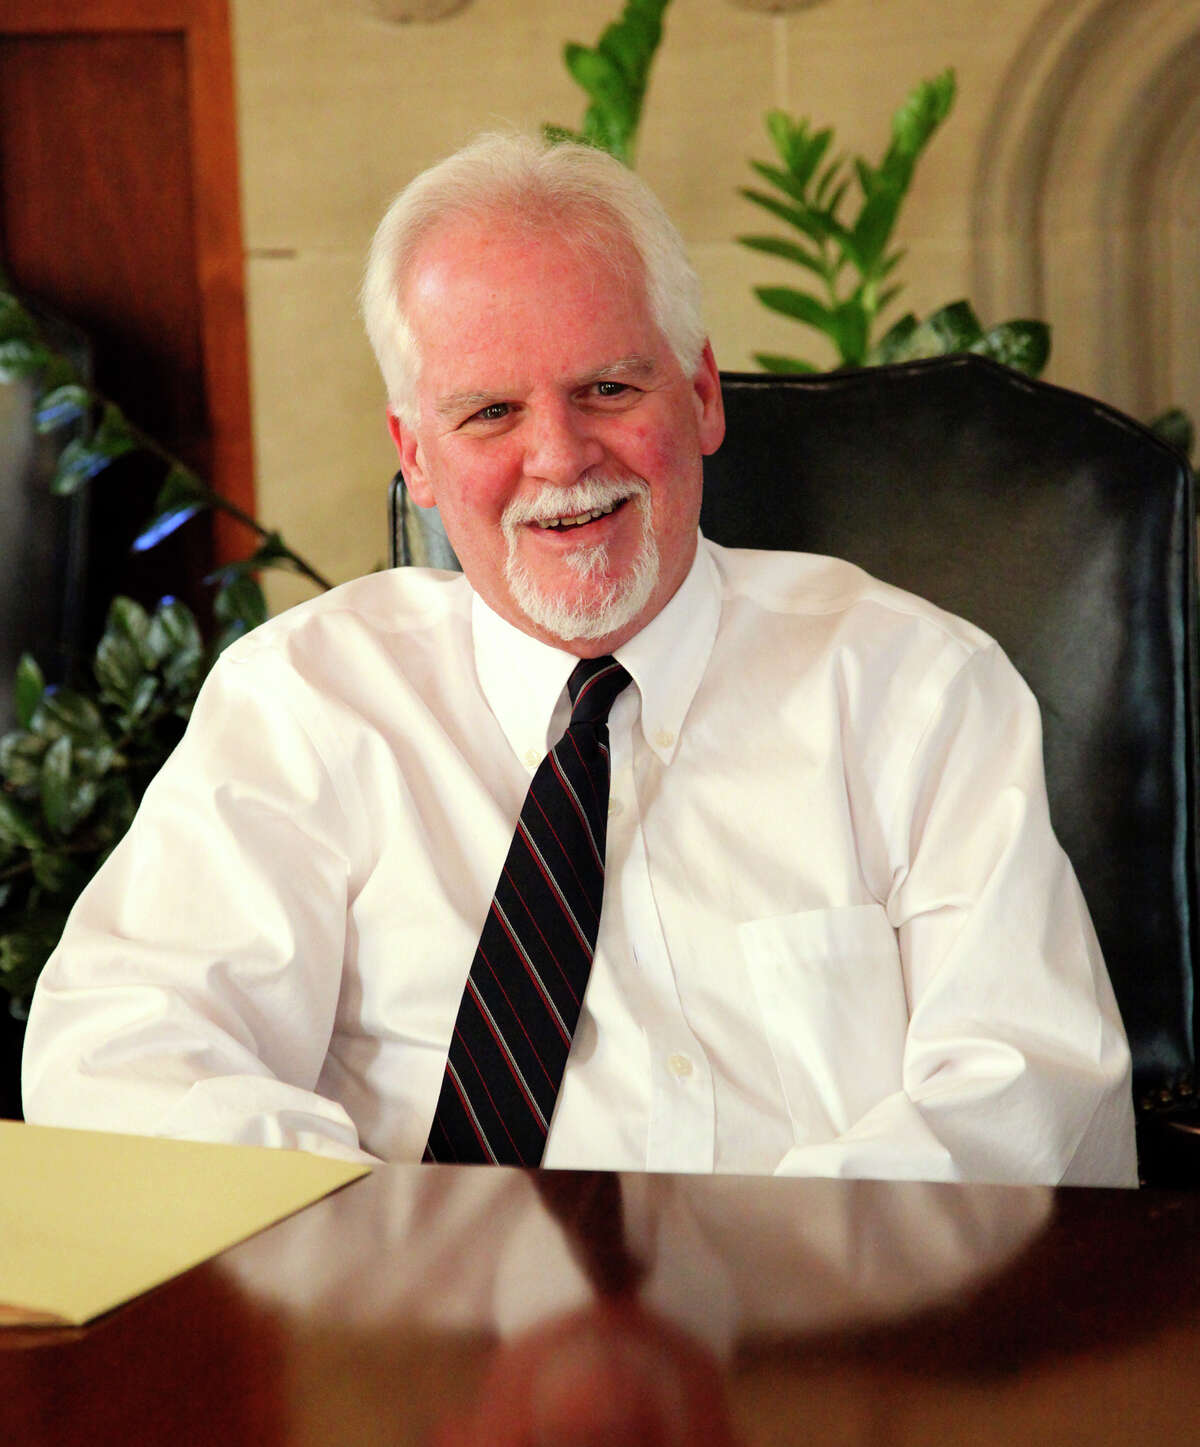 Democratic candidatefor the 21st Congressional District Tom Wakely talks to Saen editorial board on Tuesday February 9, 2016